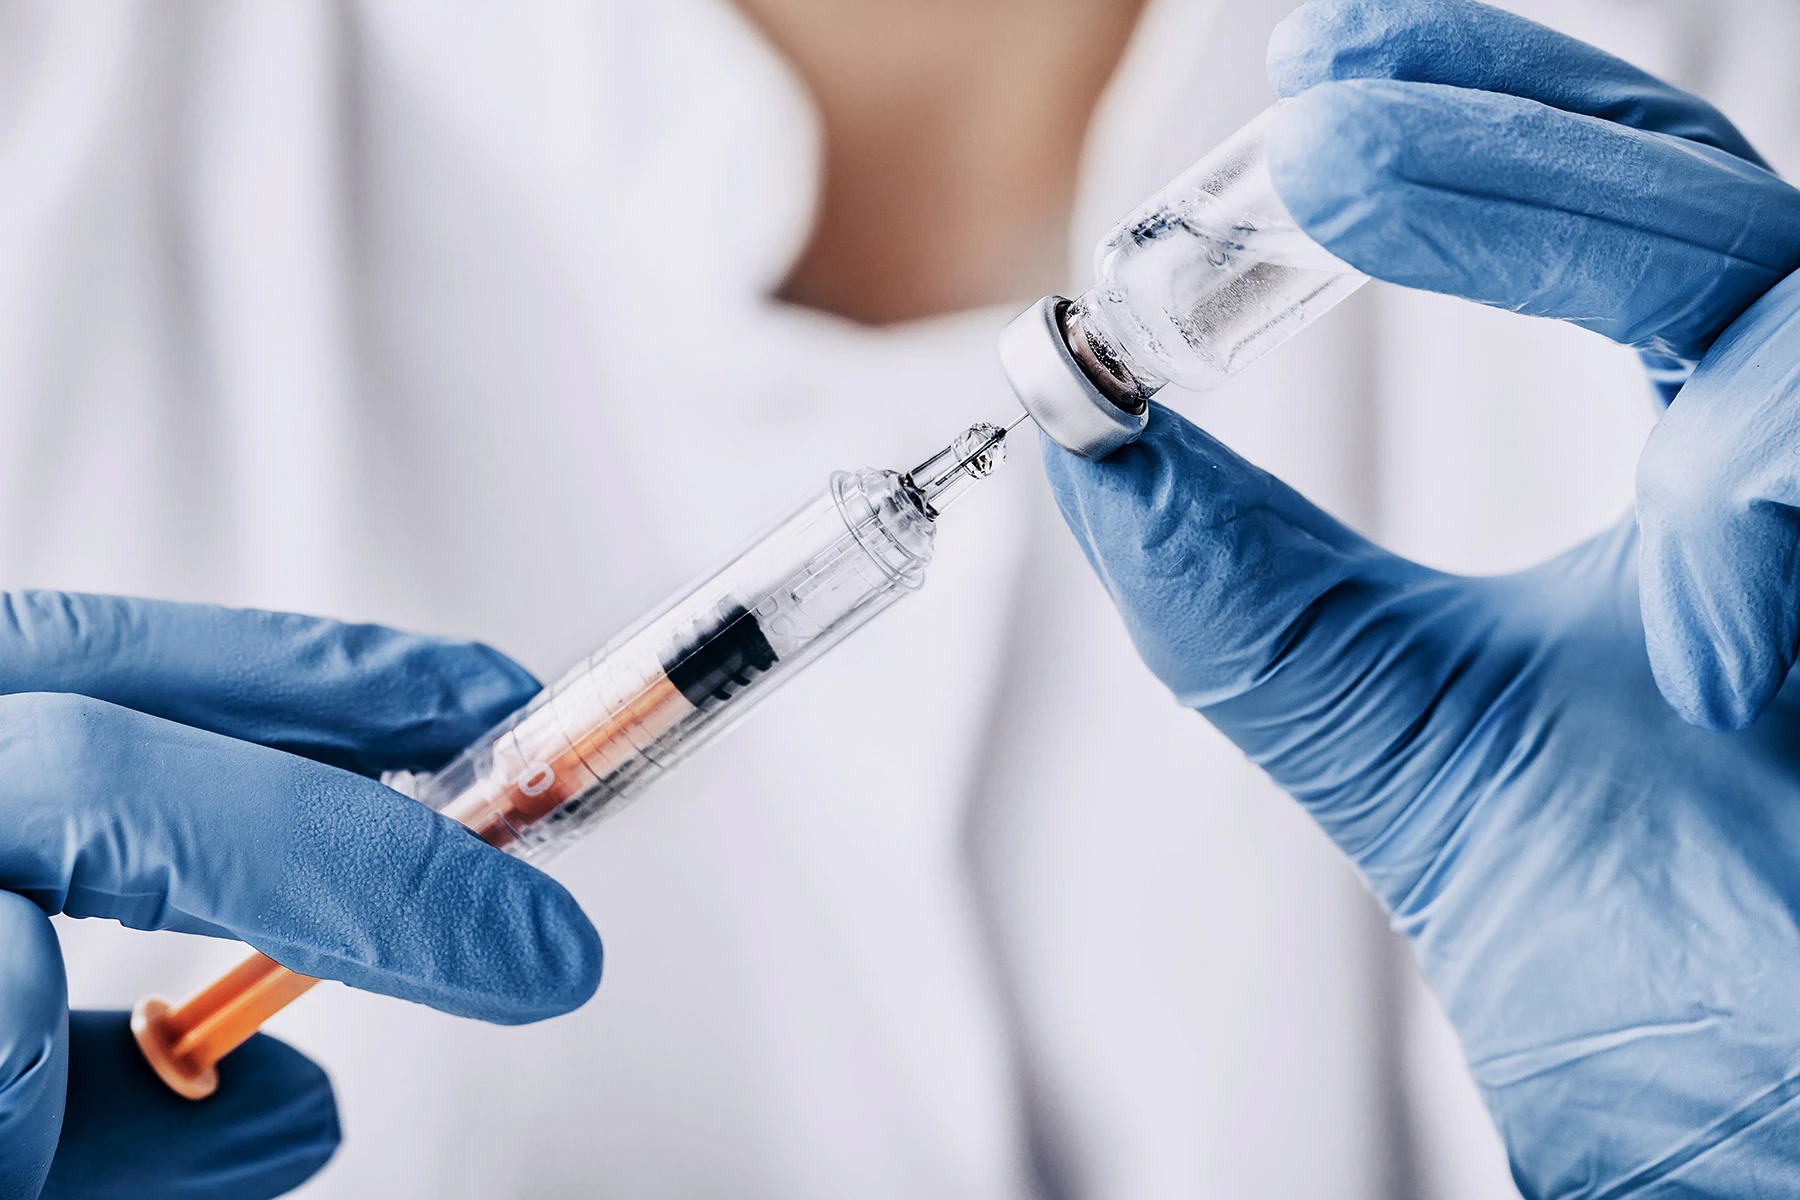 States Initiate Opening COVID-19 Vaccines to All Adults